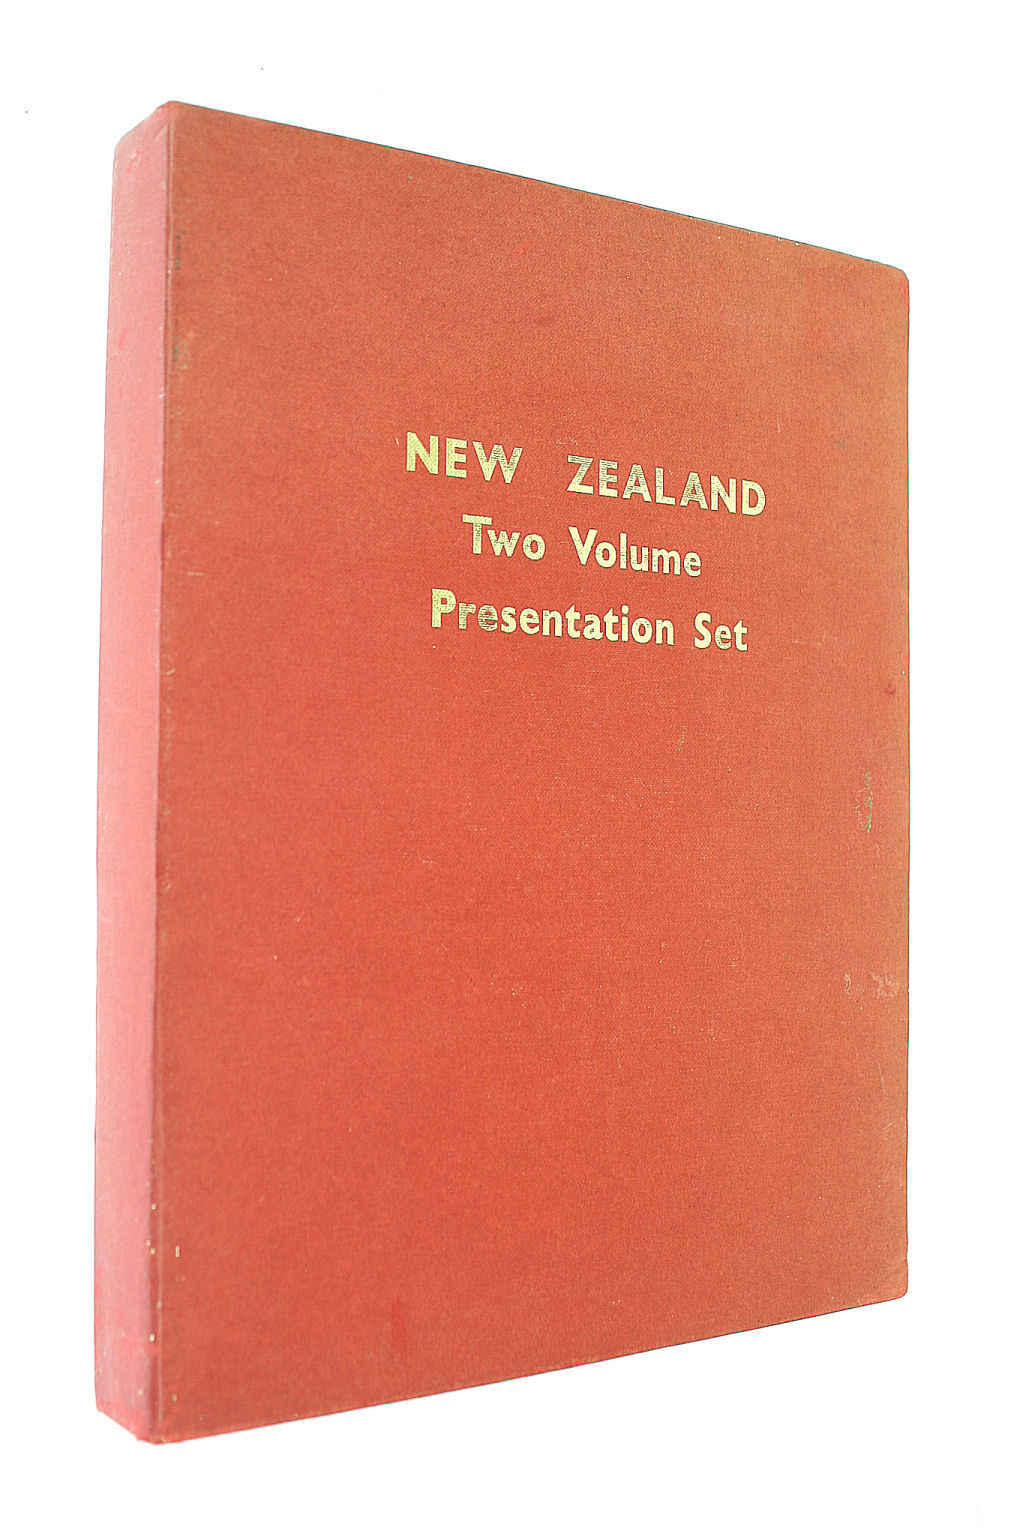 PASCOE, JOHN AND JAMES K BAXTER - New Zealand in Colour (TWO VOLUME PRESENTATION SET IN SLIPCASE)